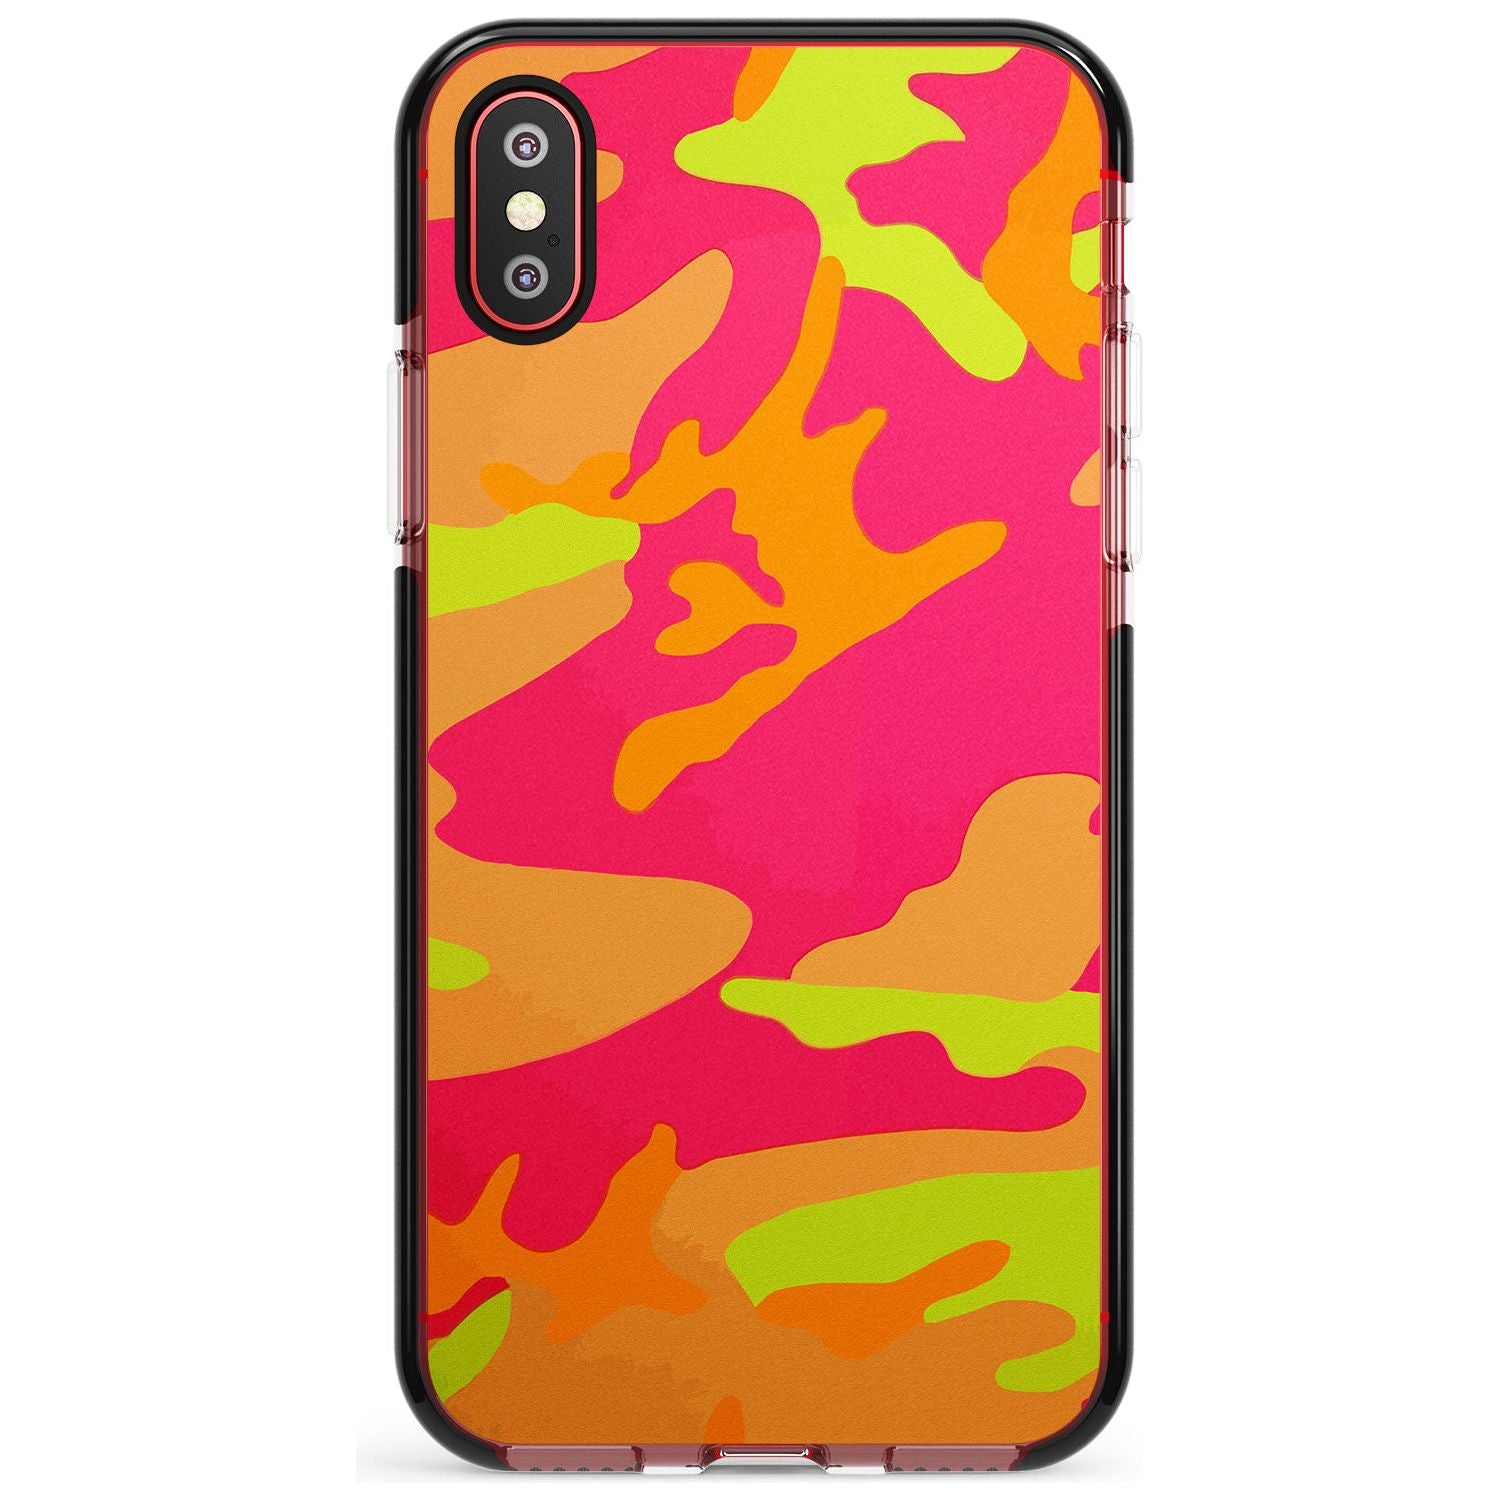 Neon Camo Black Impact Phone Case for iPhone X XS Max XR